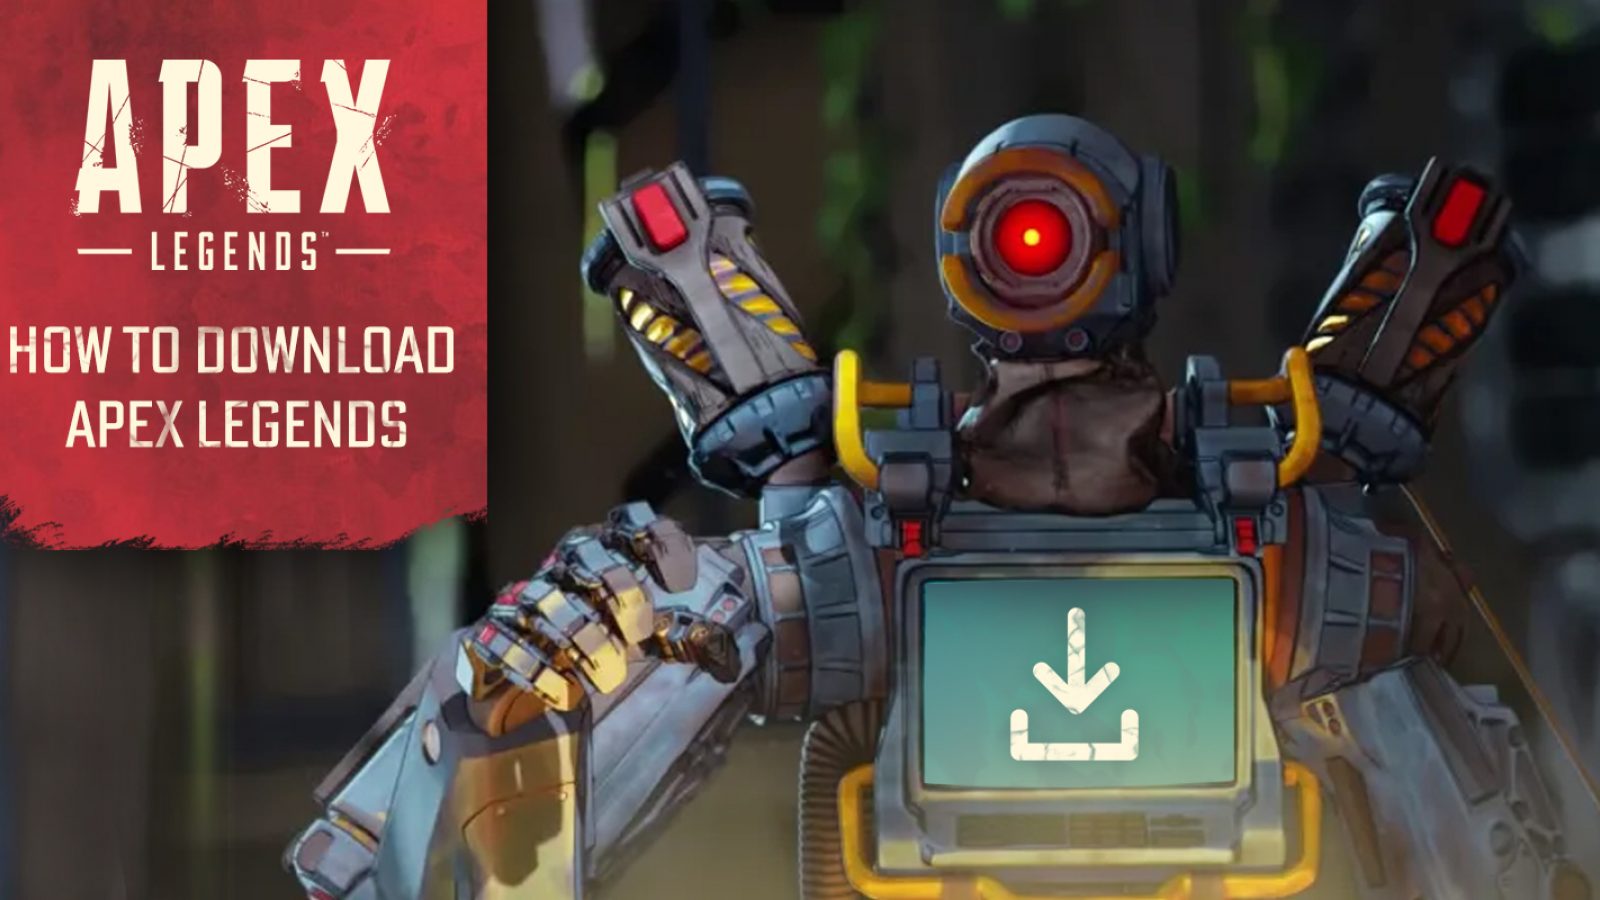 Where to download Apex Legends